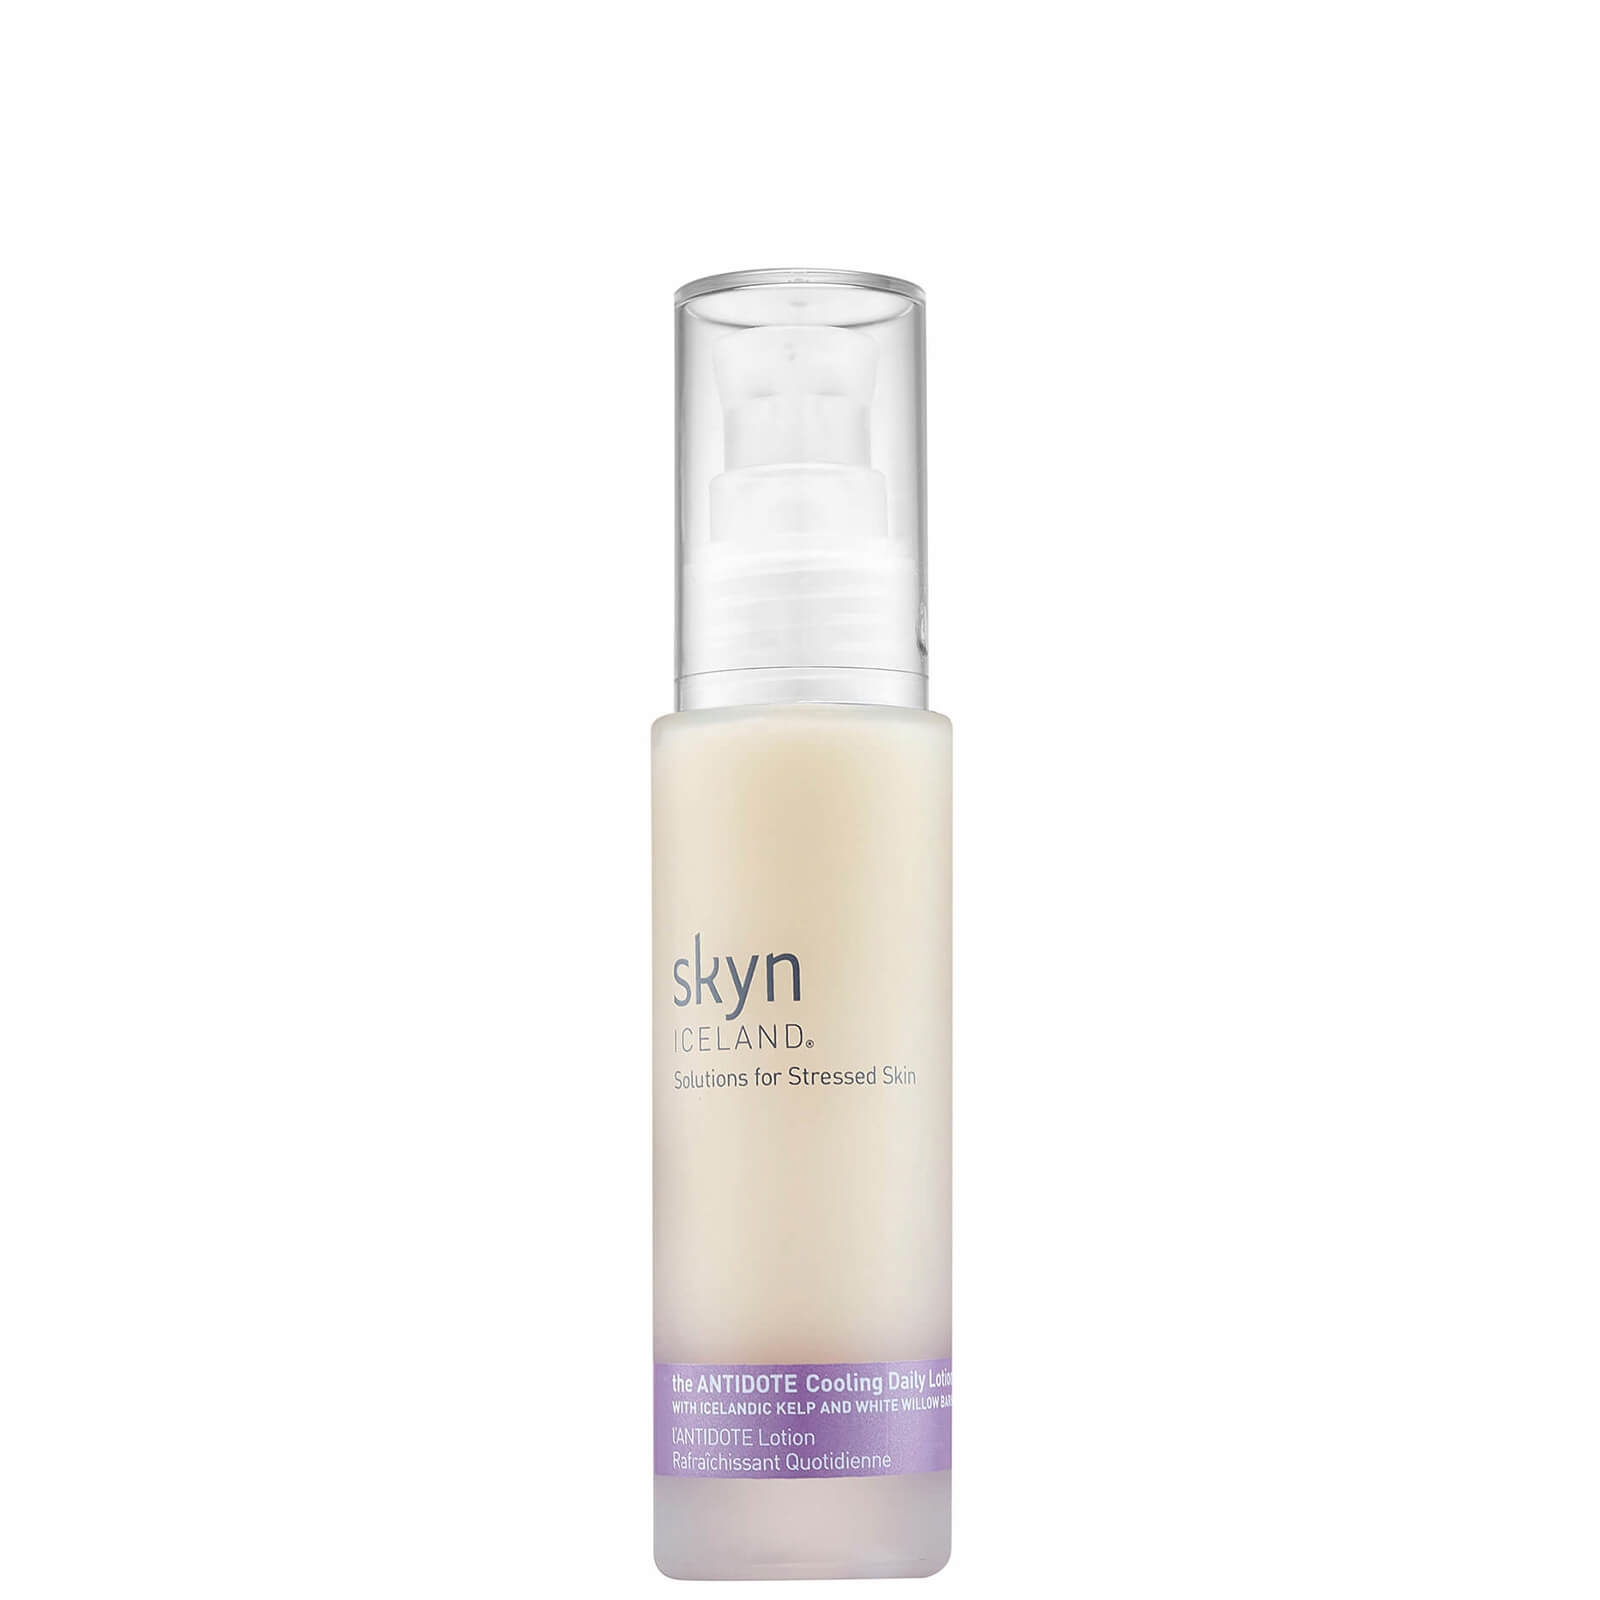 skyn iceland the antidote cooling daily lotion 52ml donna